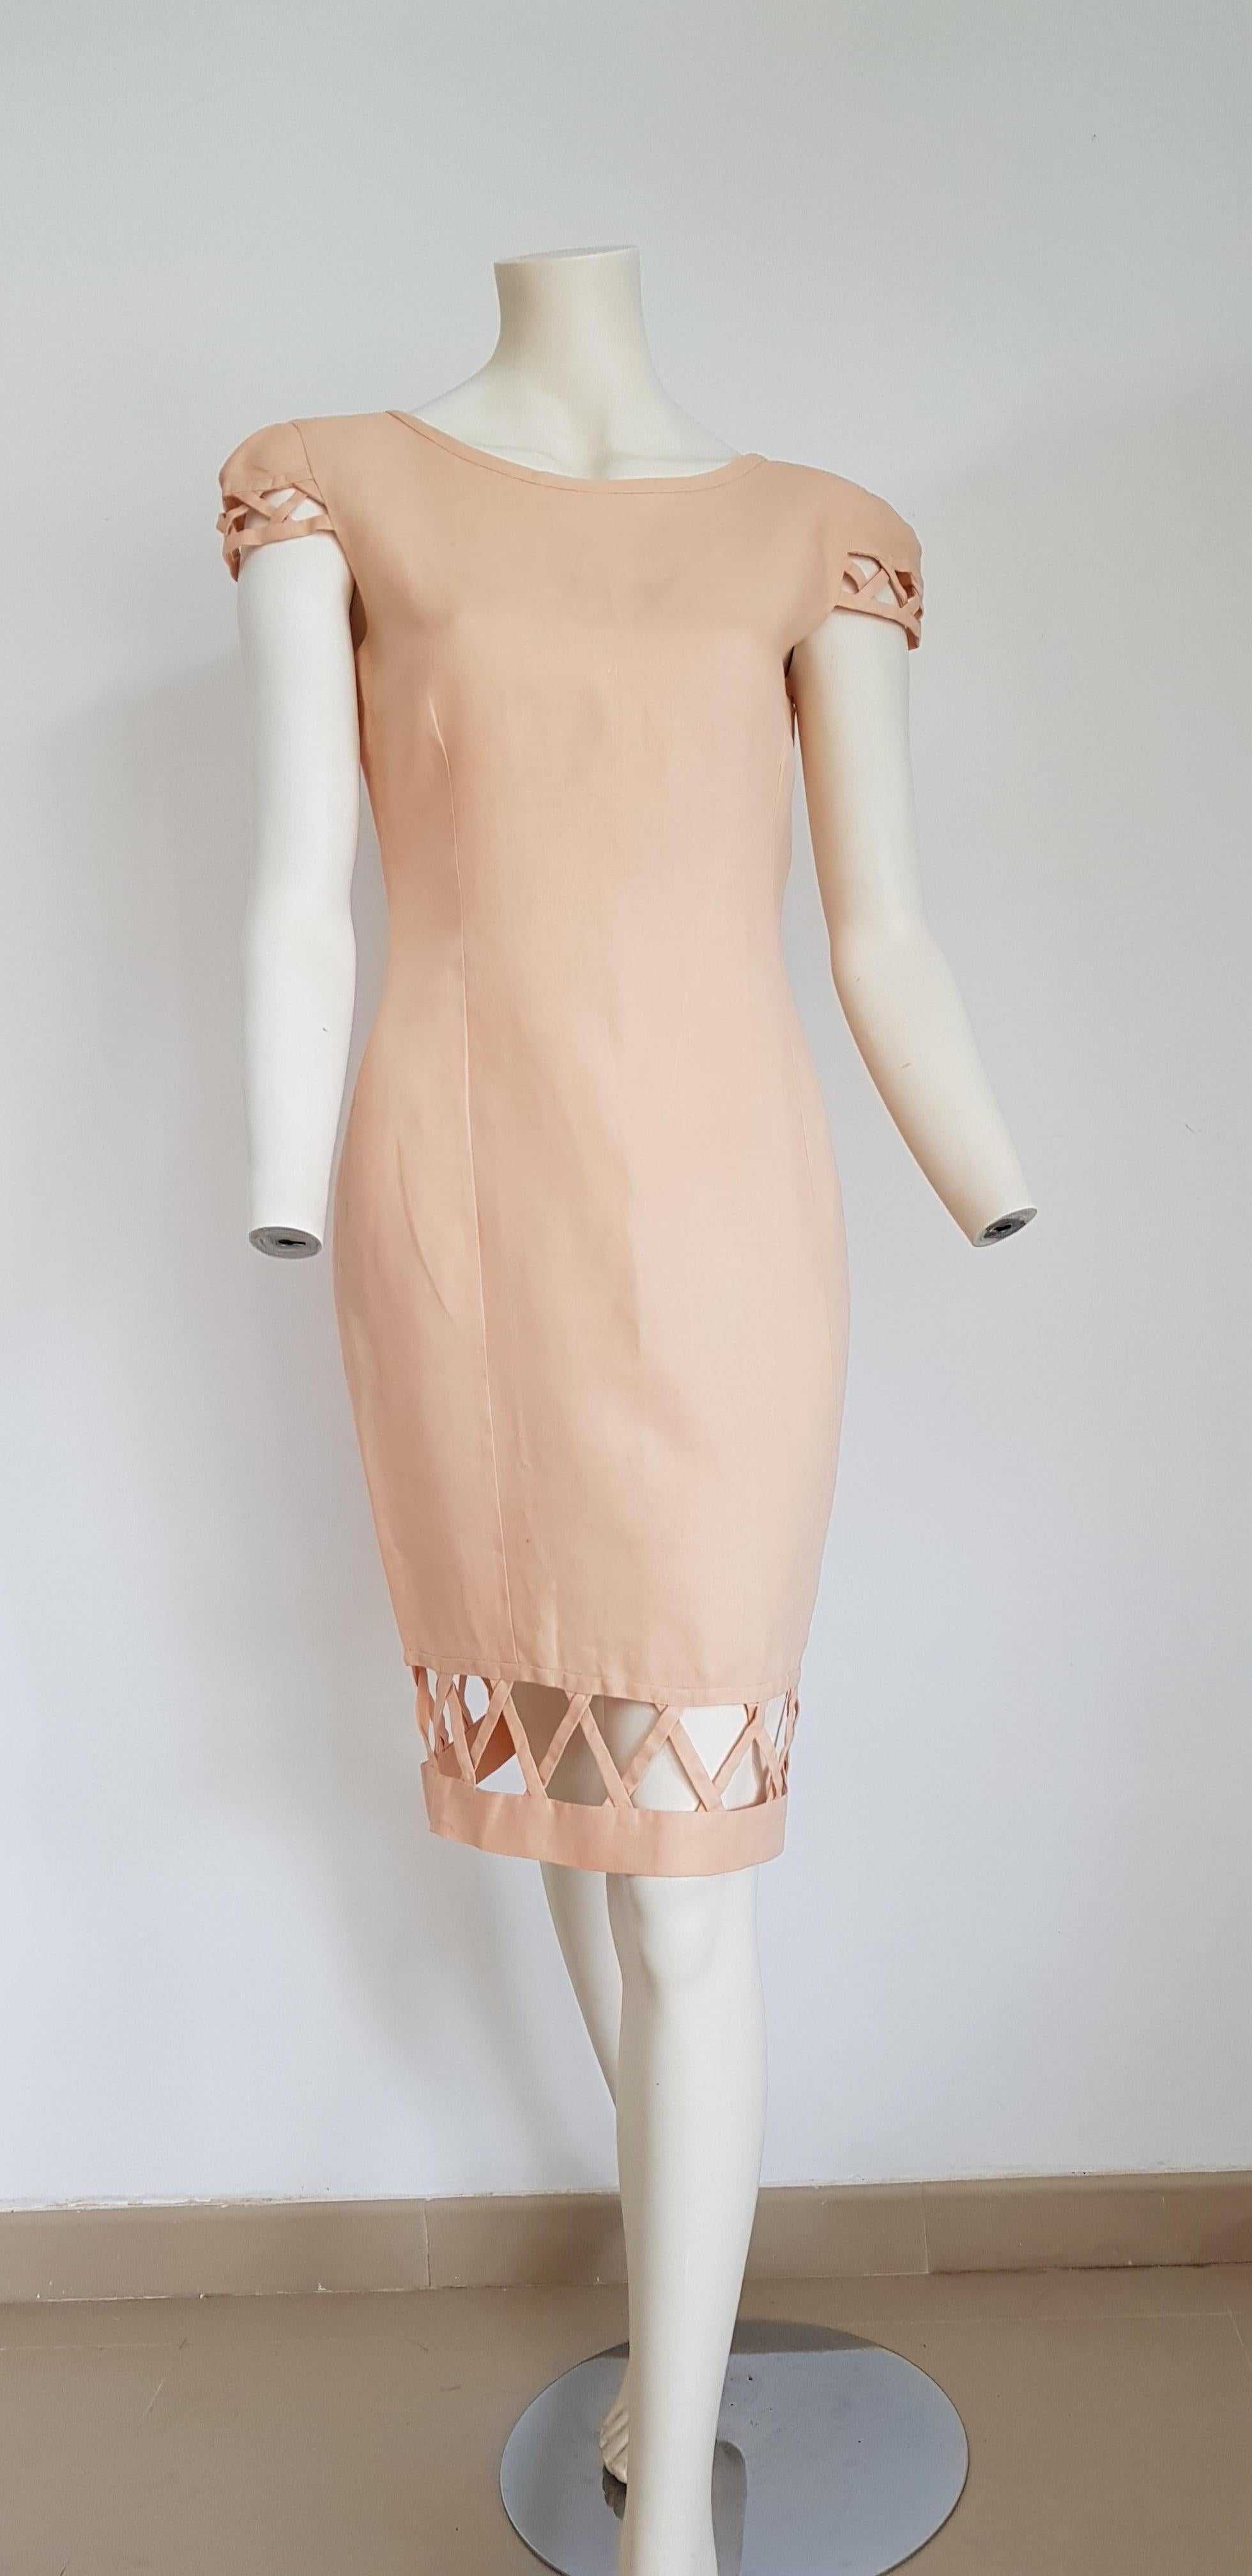 Christian LACROIX Haute Couture Irish linen with perforated edges, short sleeve, light salmon color dress - Unworn, New. 
SIZE: equivalent to about Small / Medium, please review approx measurements as follows in cm: lenght 98, chest underarm to